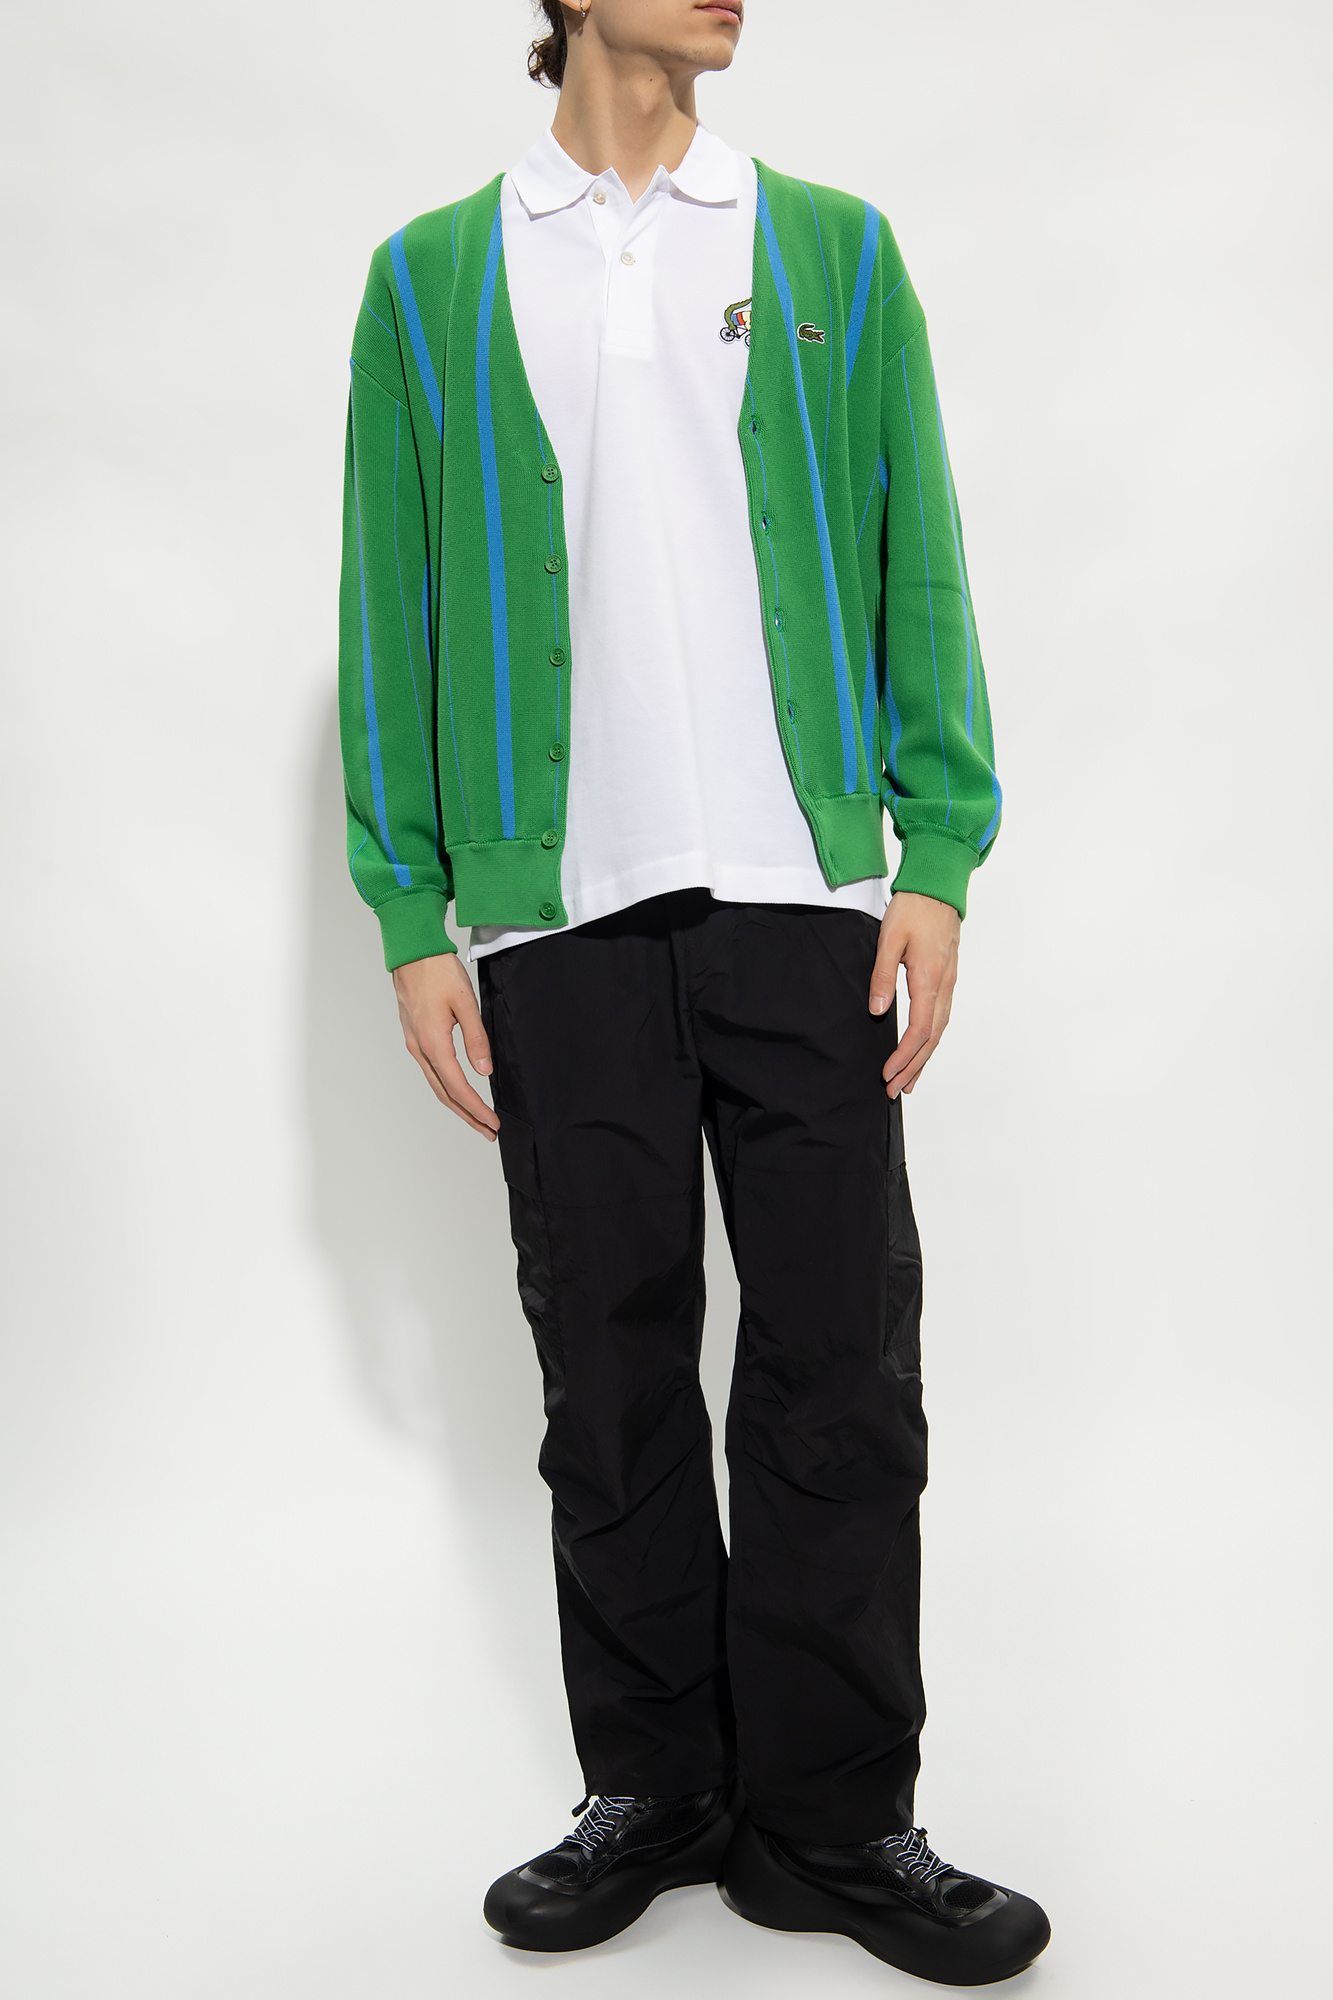 Green Netflix Edition Track Pants by Lacoste on Sale